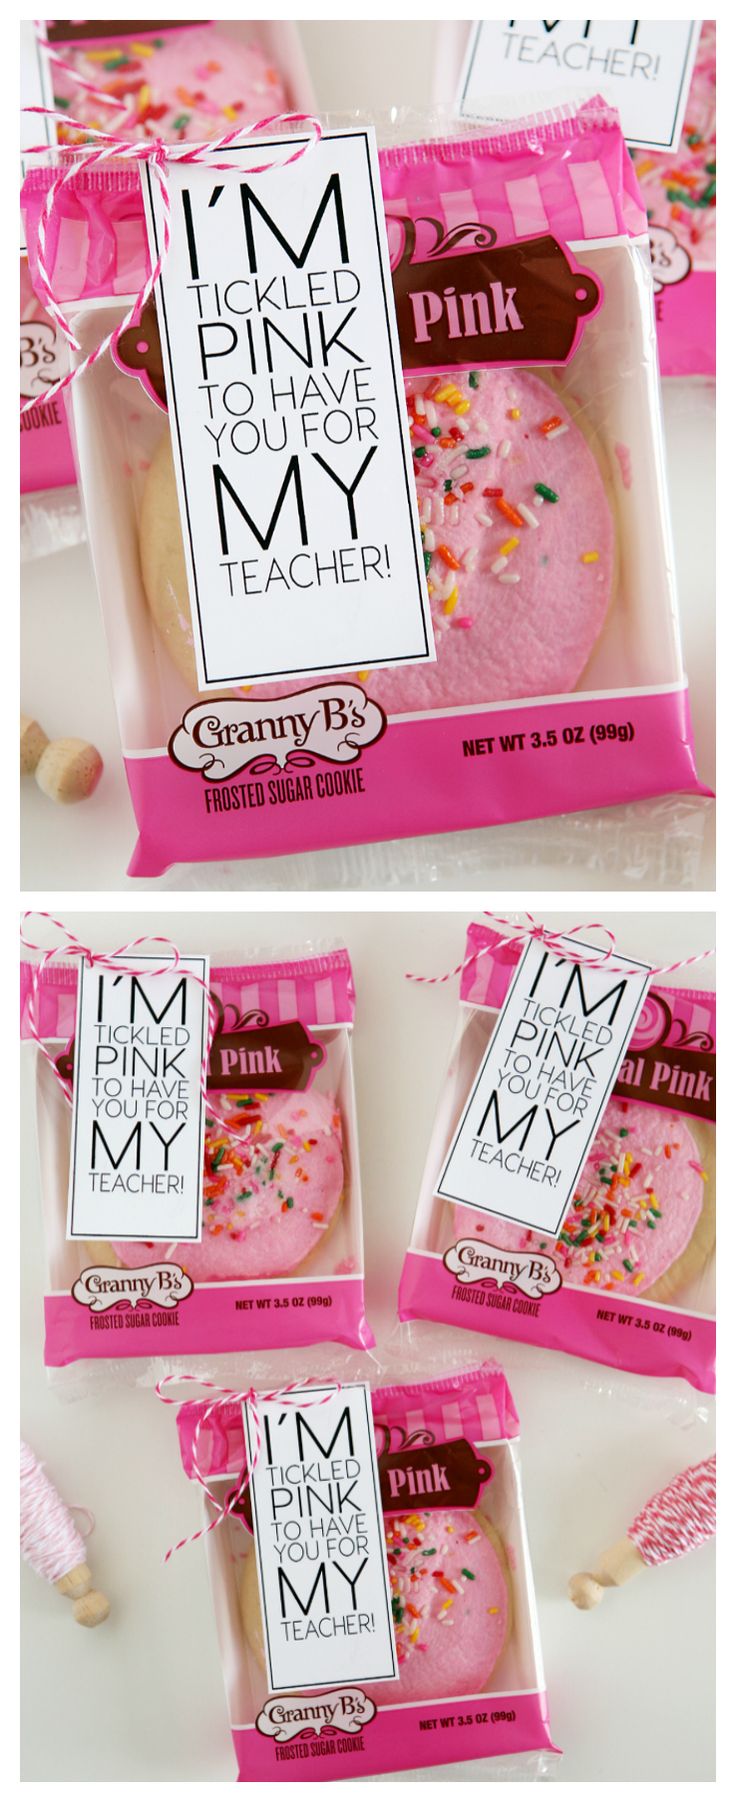 I'm Tickled Pink To Have You For My Teacher | Back to School Teacher Gift #backt...